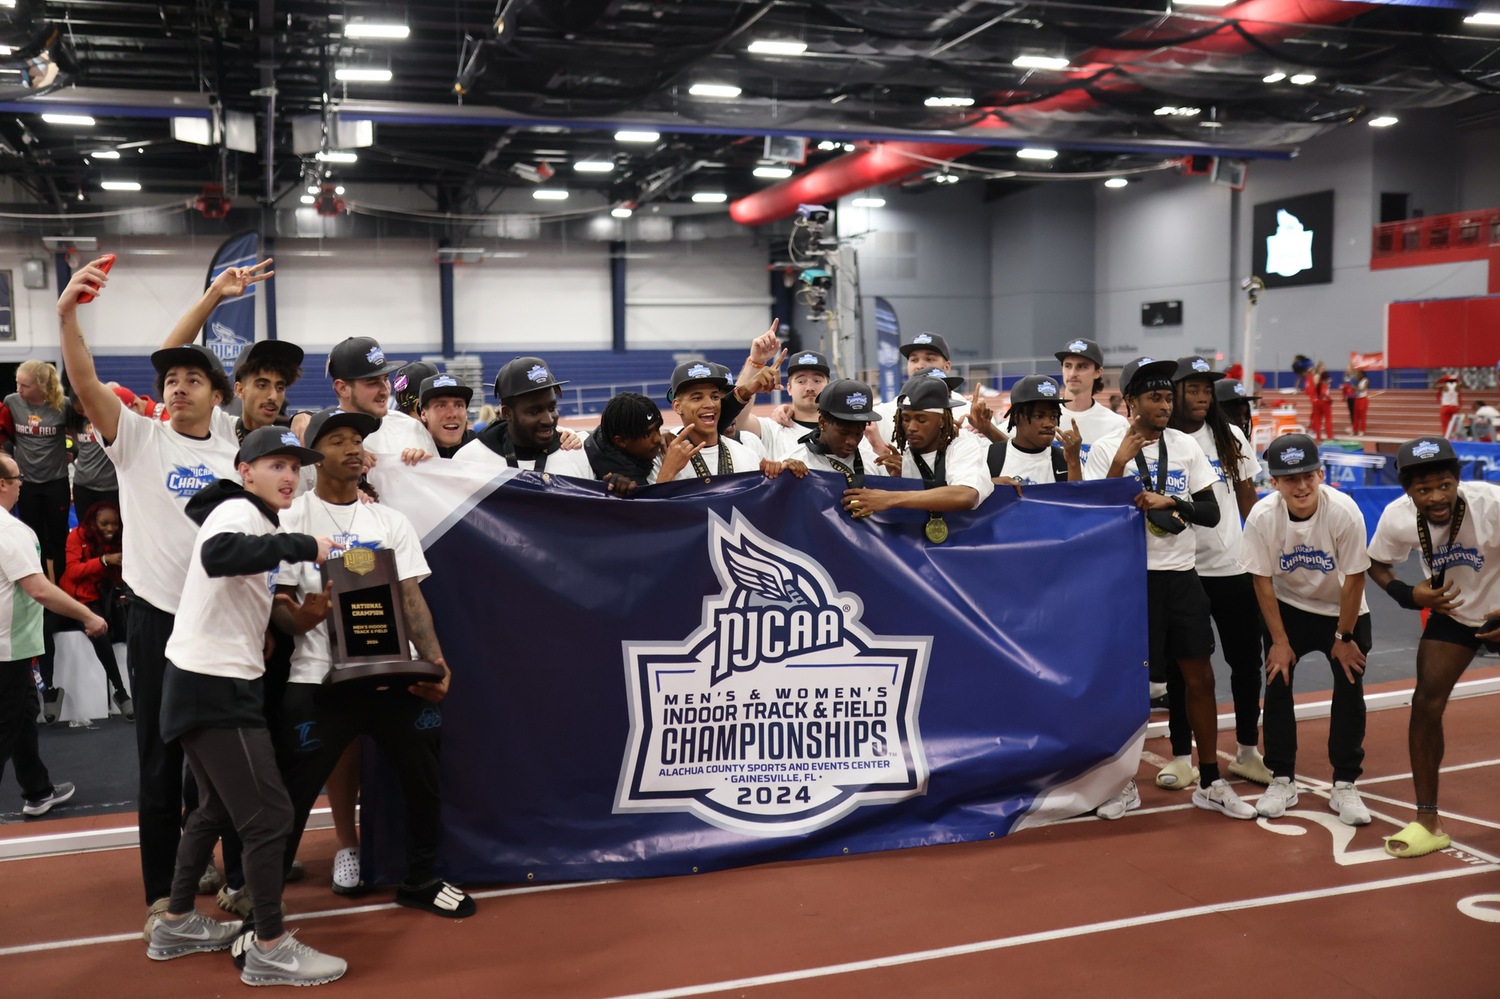 NATIONAL CHAMPS! WARRIORS CAPTURE FIRST TITLE